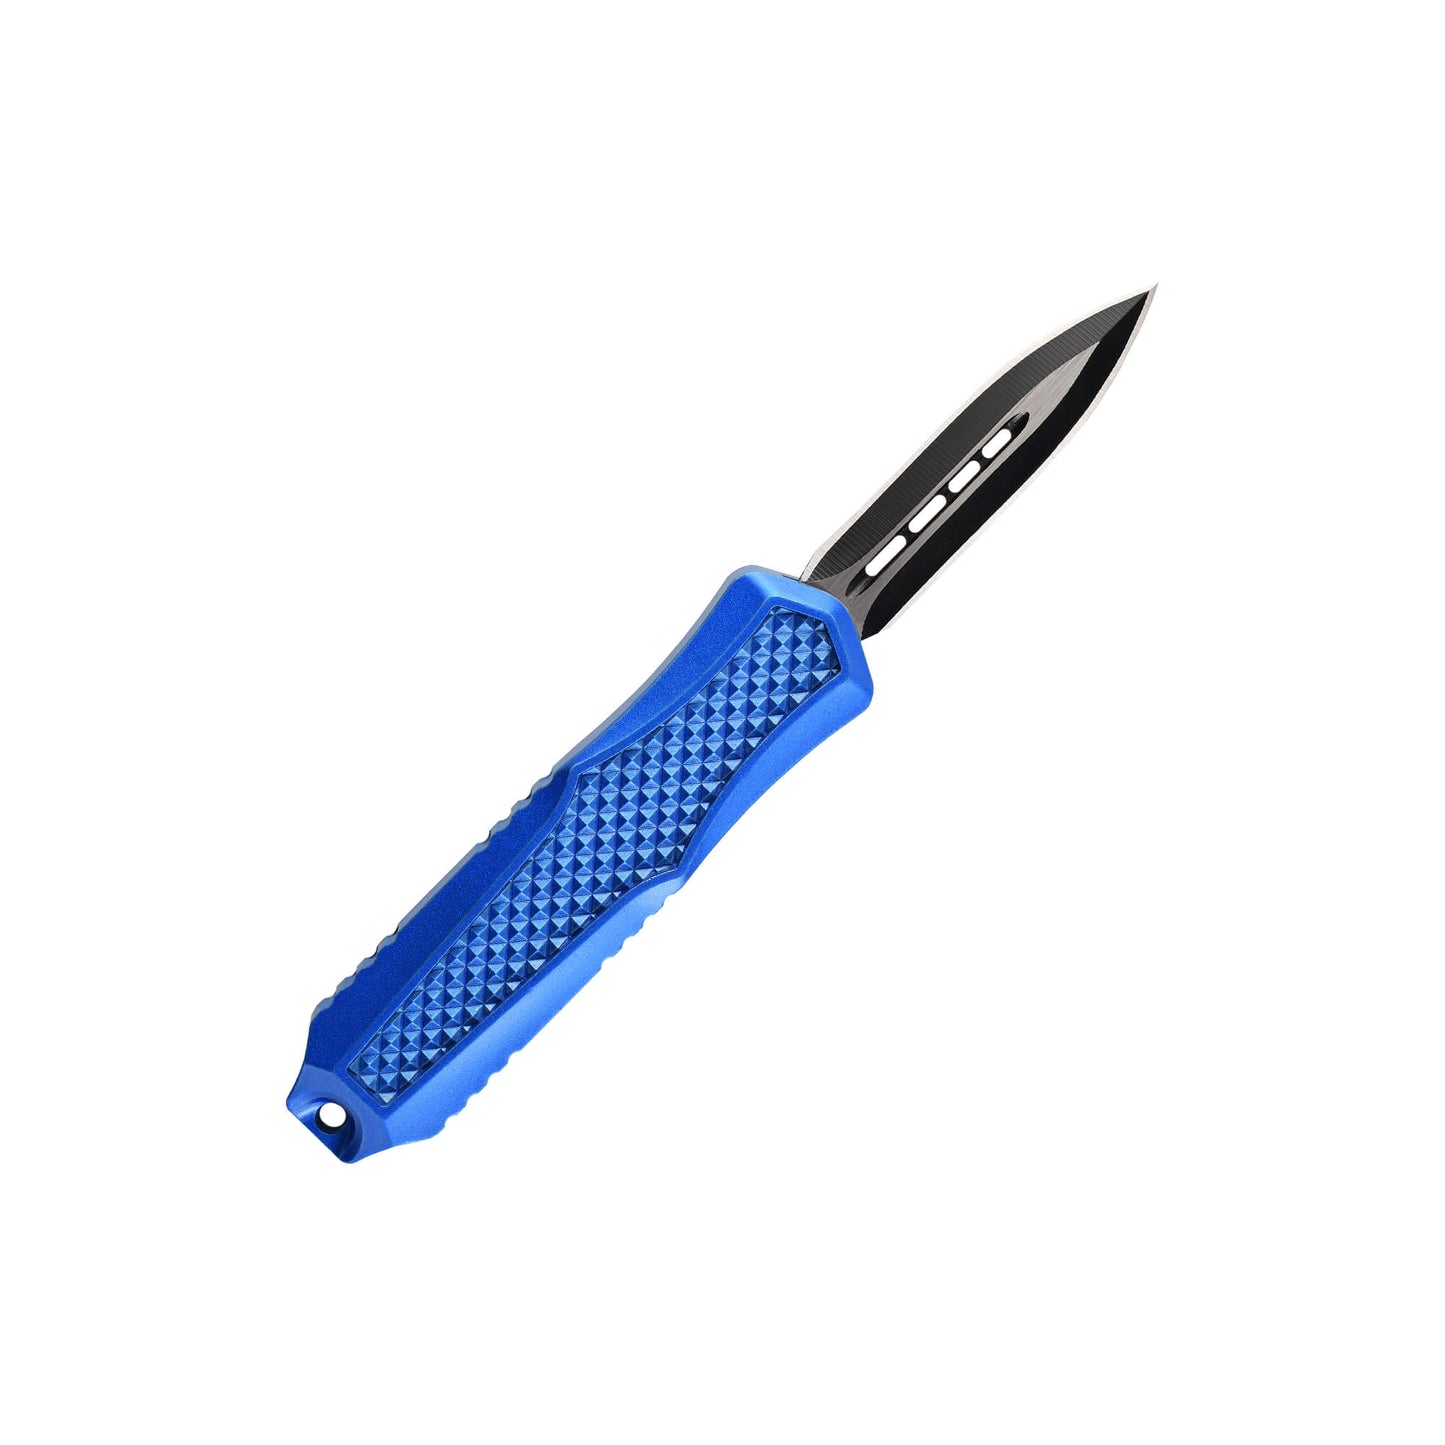 Blue Automatic OTF knife Relik from Mavik Gear with spear point blade, Zinc alloy handle, button lock and lanyard hole.